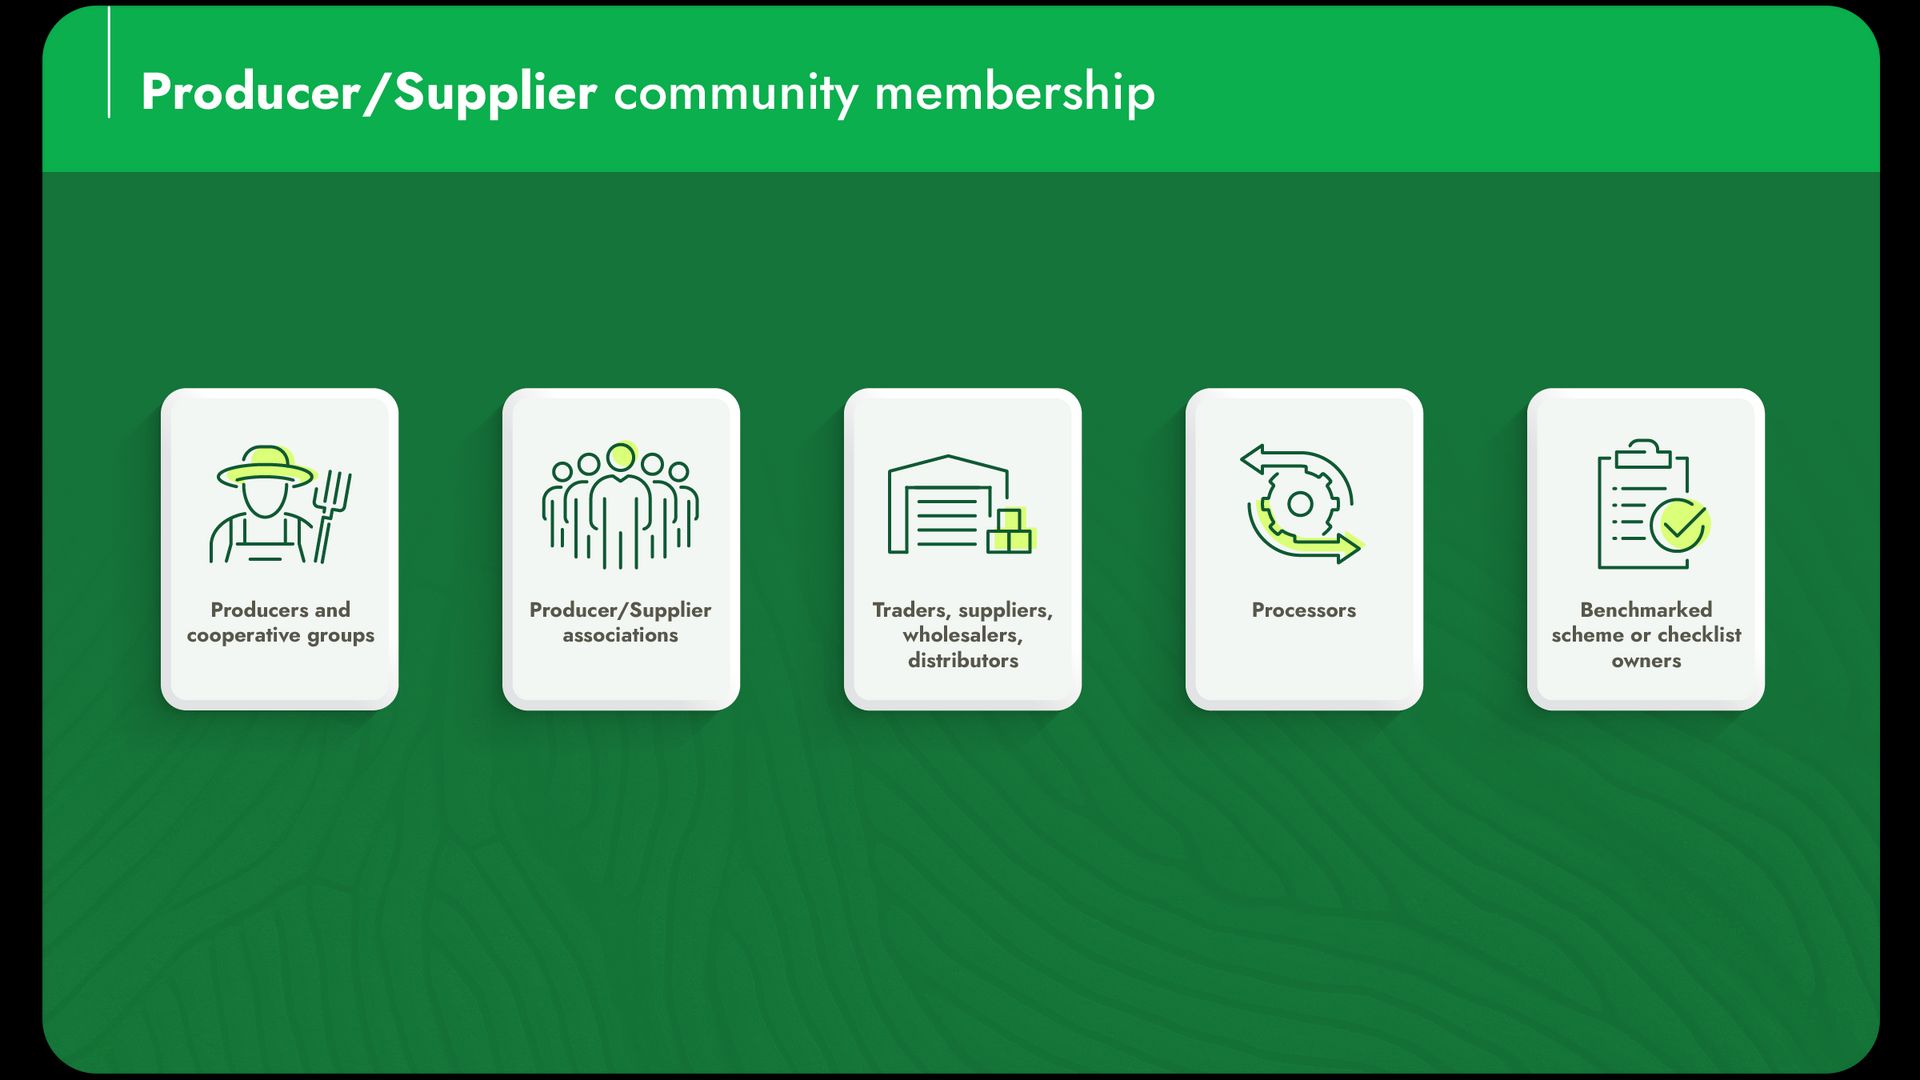 Producer/Supplier community membership is for producers and cooperative groups, producer/supplier associations, traders, suppliers, wholesalers, distributors, processors and benchmarked scheme or checklist owners.